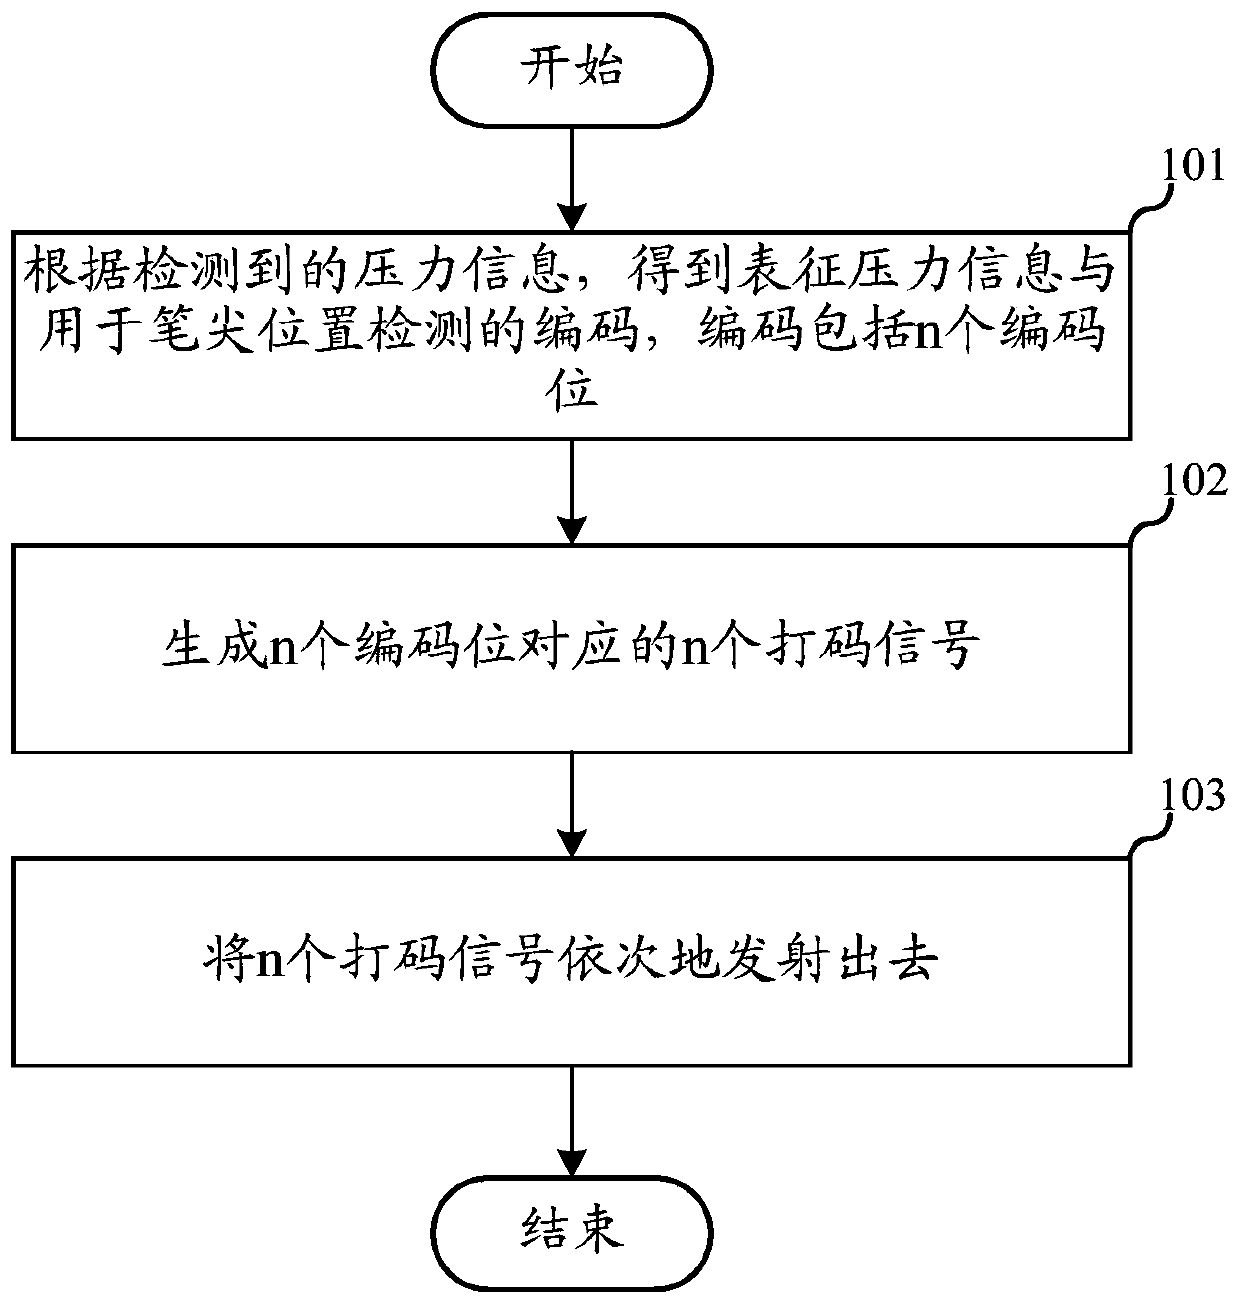 A signal transmitting and receiving method, a processor chip, an active pen and a touch screen